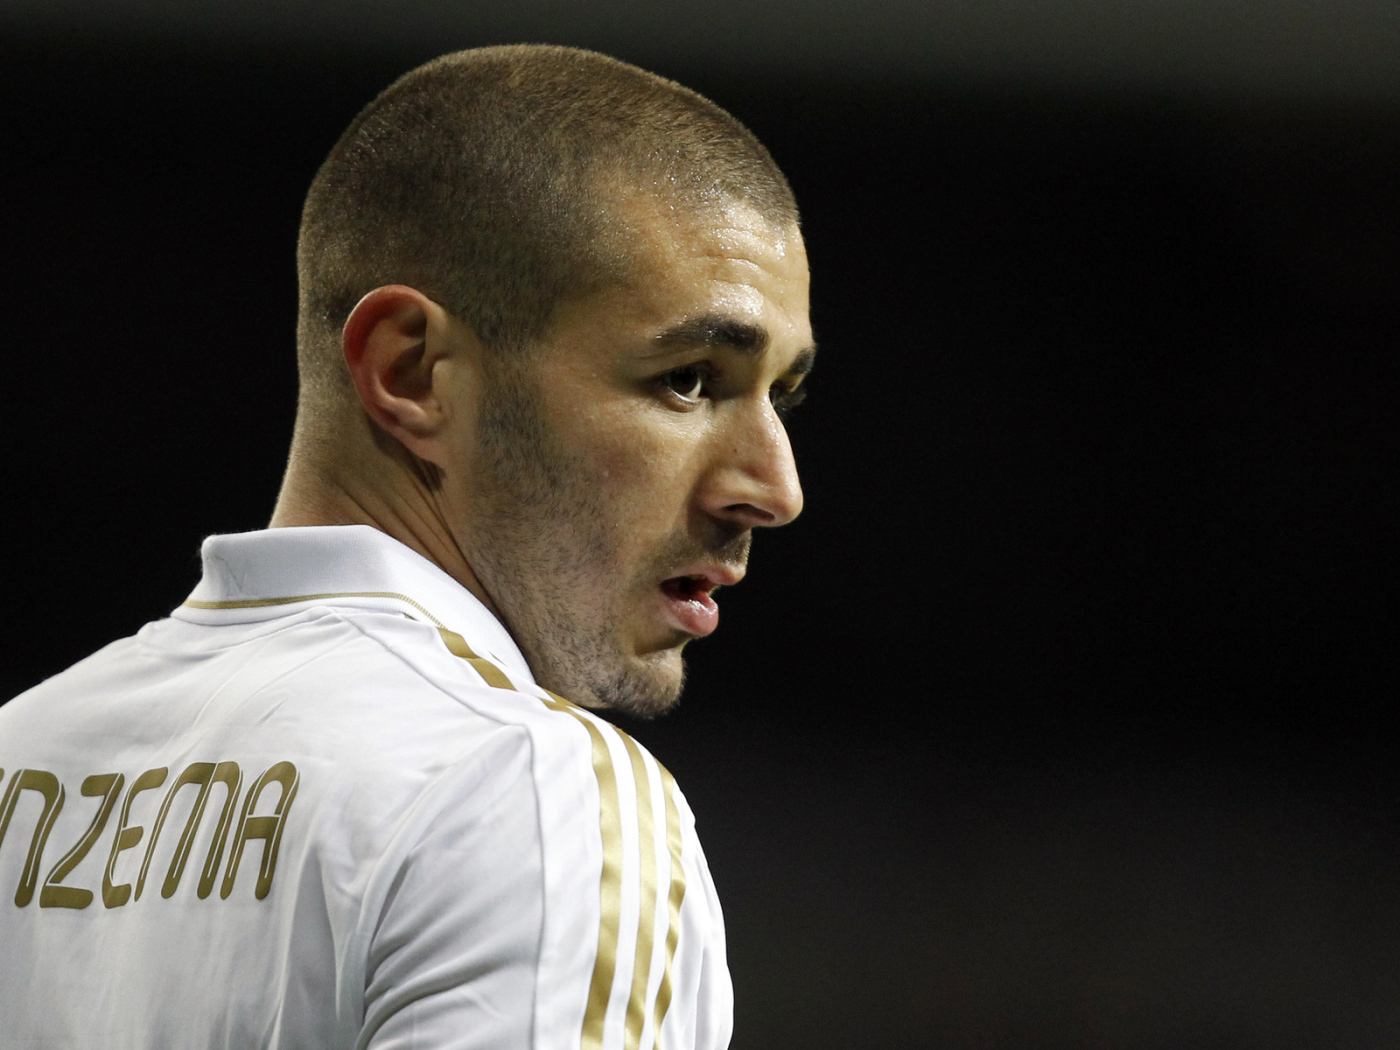 The player of Real Madrid Karim Benzema on the black background